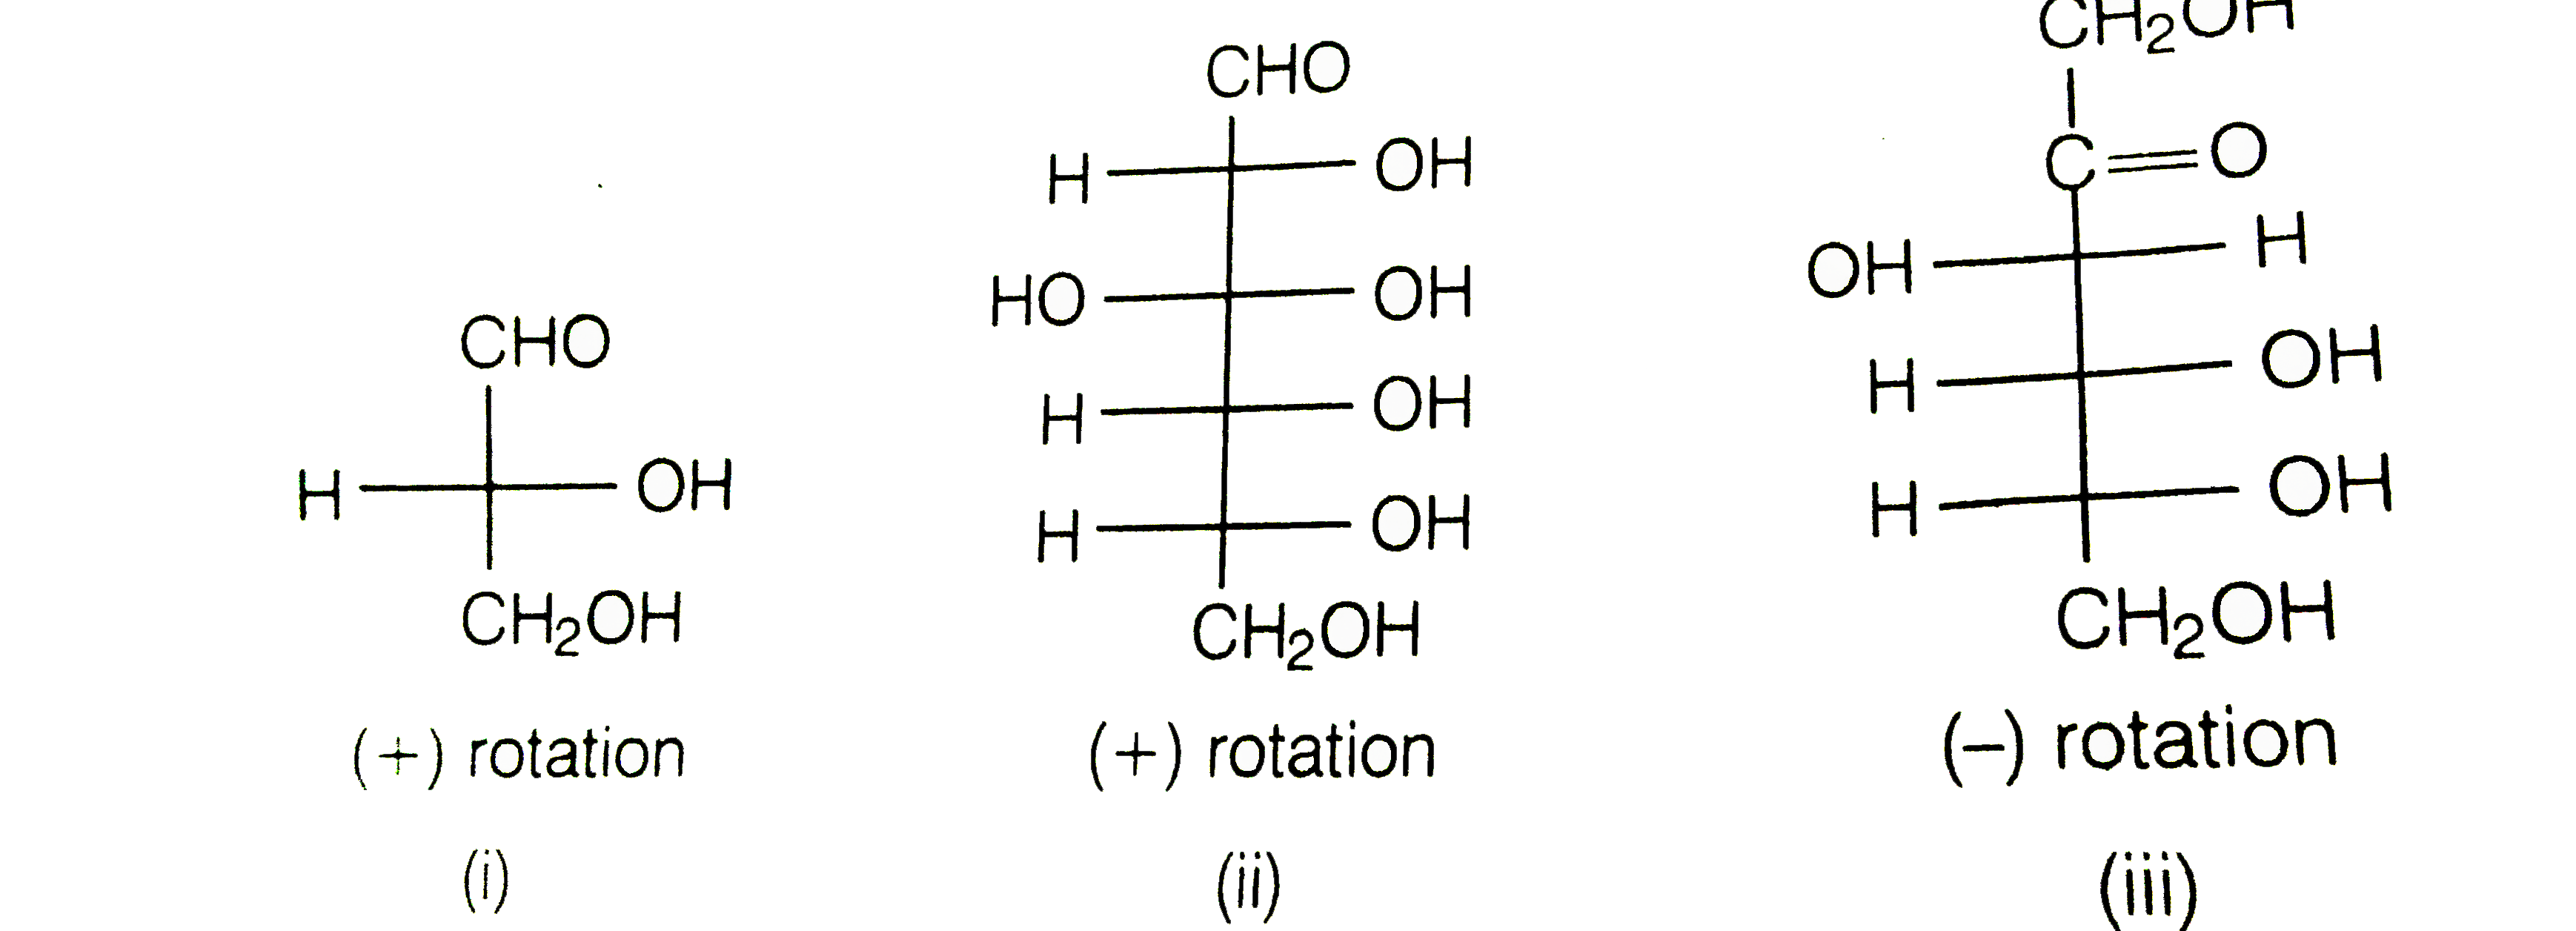 Optical rotations of some compounds alongwith their structures are given below which of them have D configuration.   
 (a)I,II,III
 (b)II,III
 (c)I,II
 (d)III